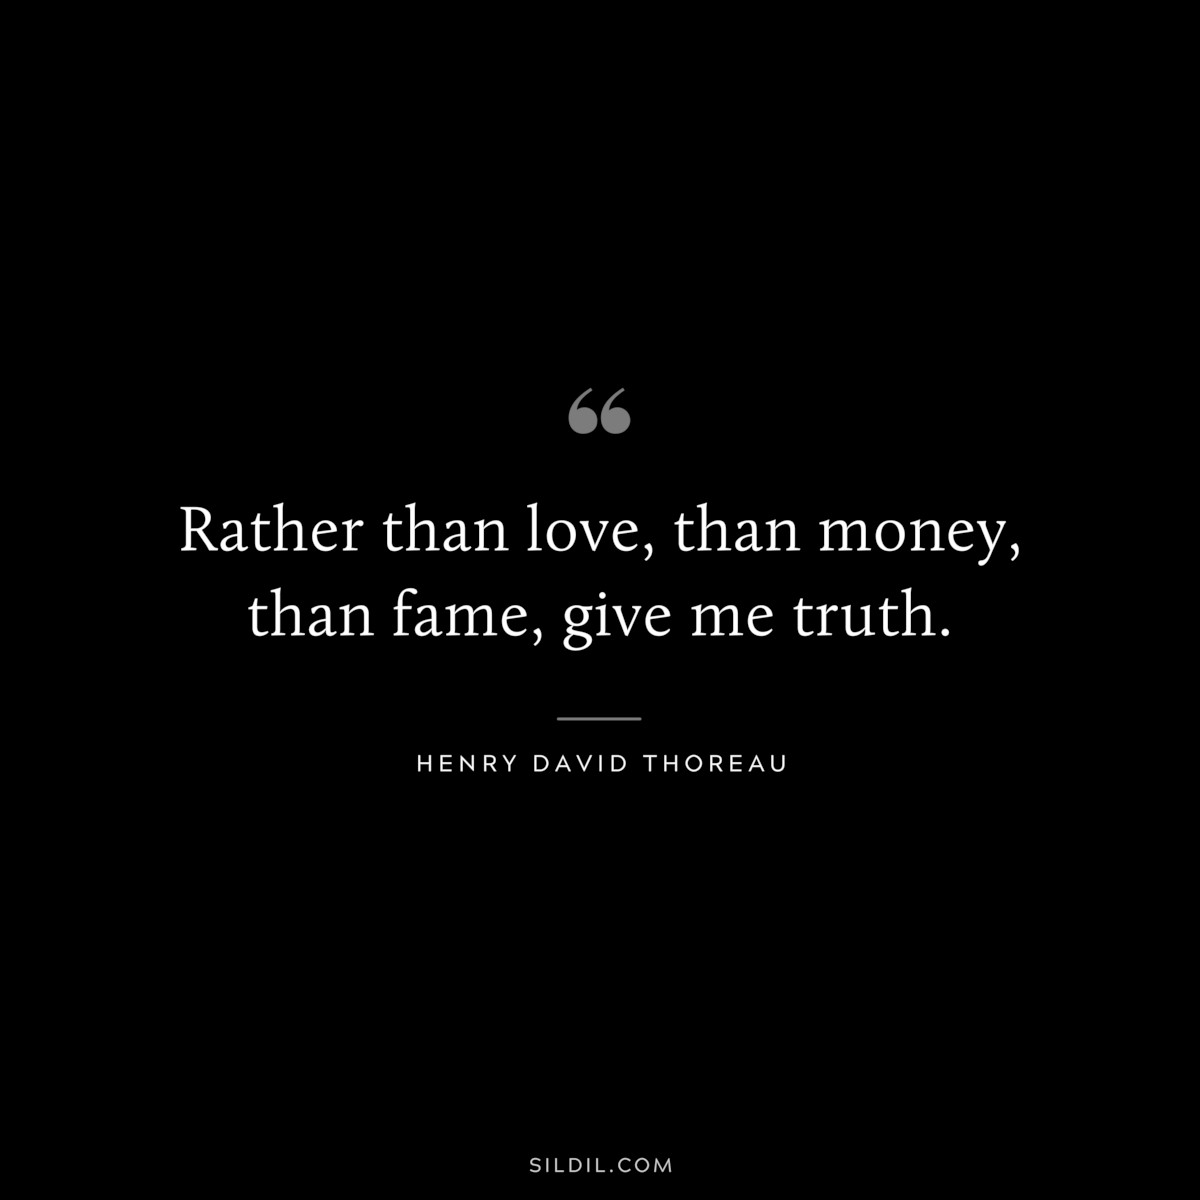 Rather than love, than money, than fame, give me truth. — Henry David Thoreau